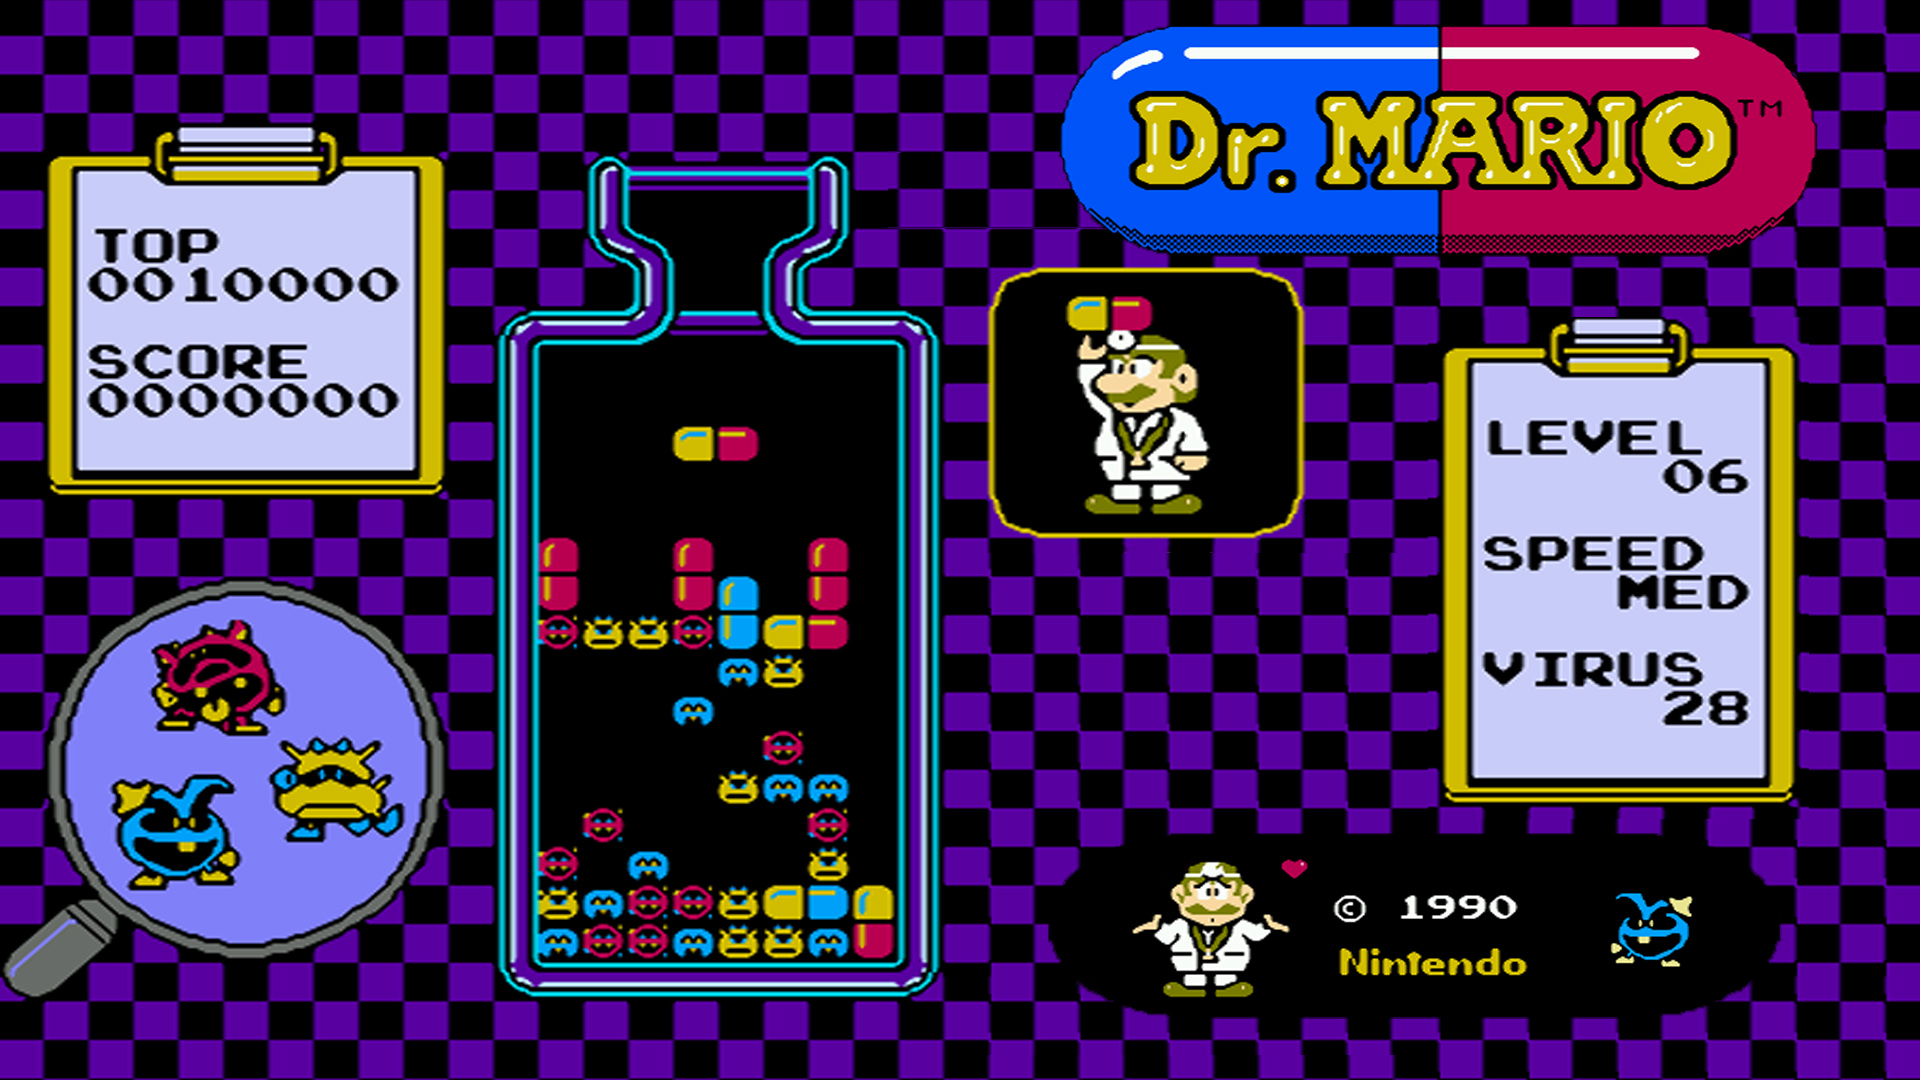 How many dr mario games are there